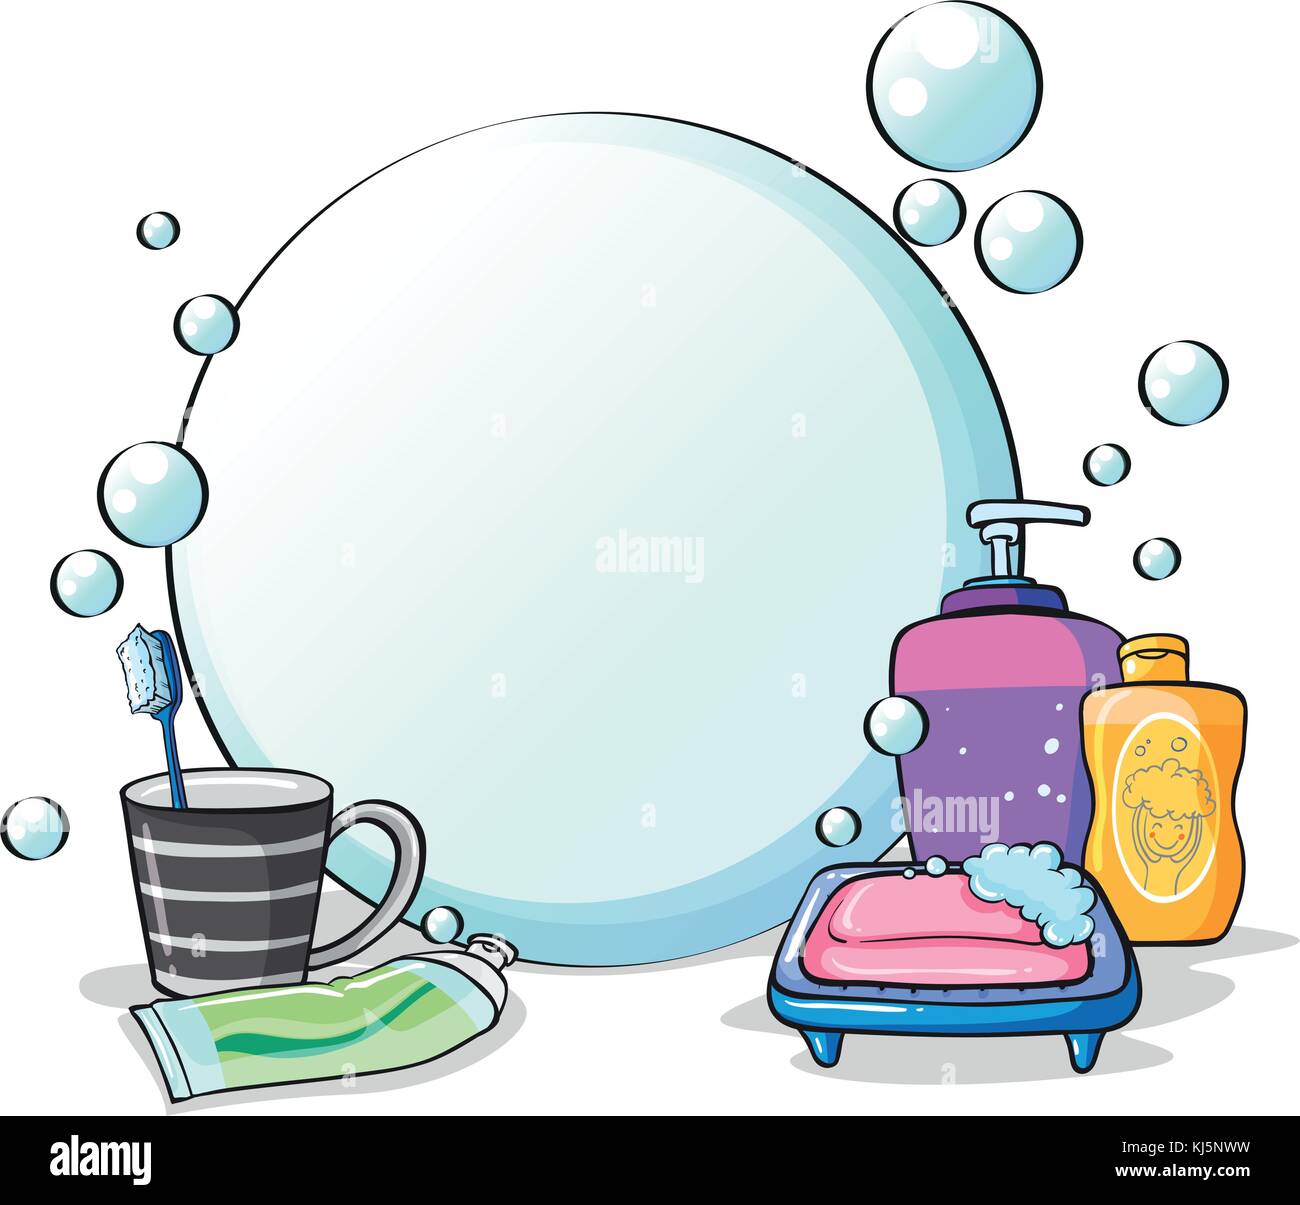 Illustration of the things needed for grooming on a white background Stock Vector